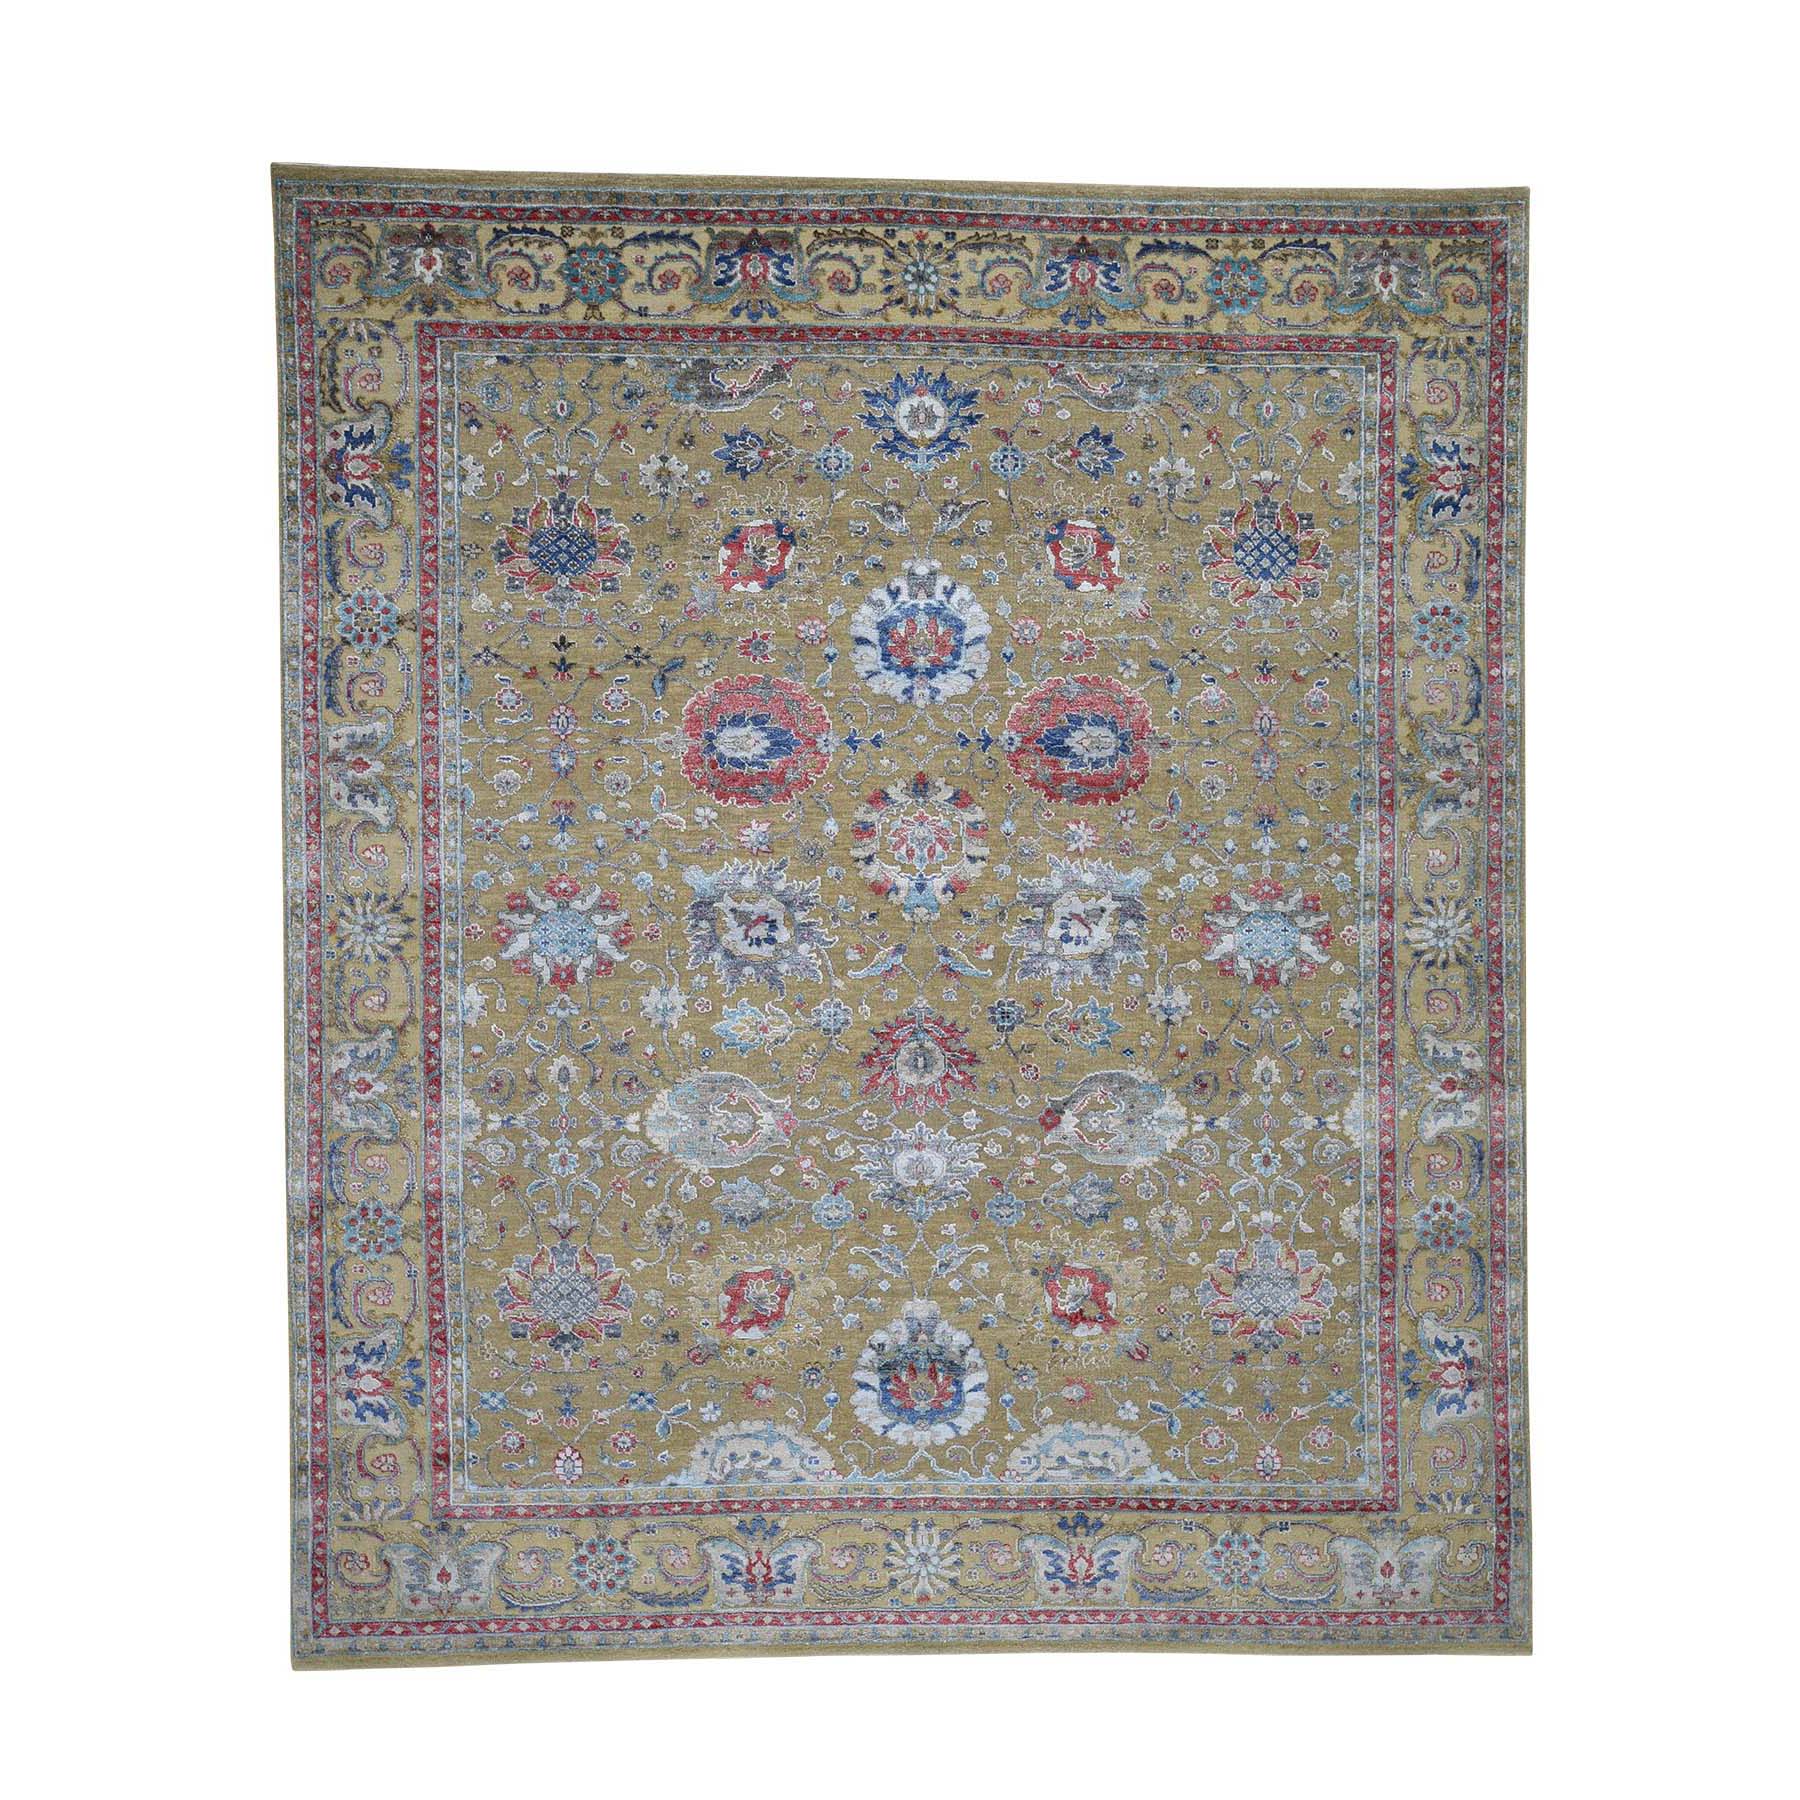 8-1 x9-7  Textured Silk With Textured Wool Mahal Design Hand-Knotted Oriental Rug 